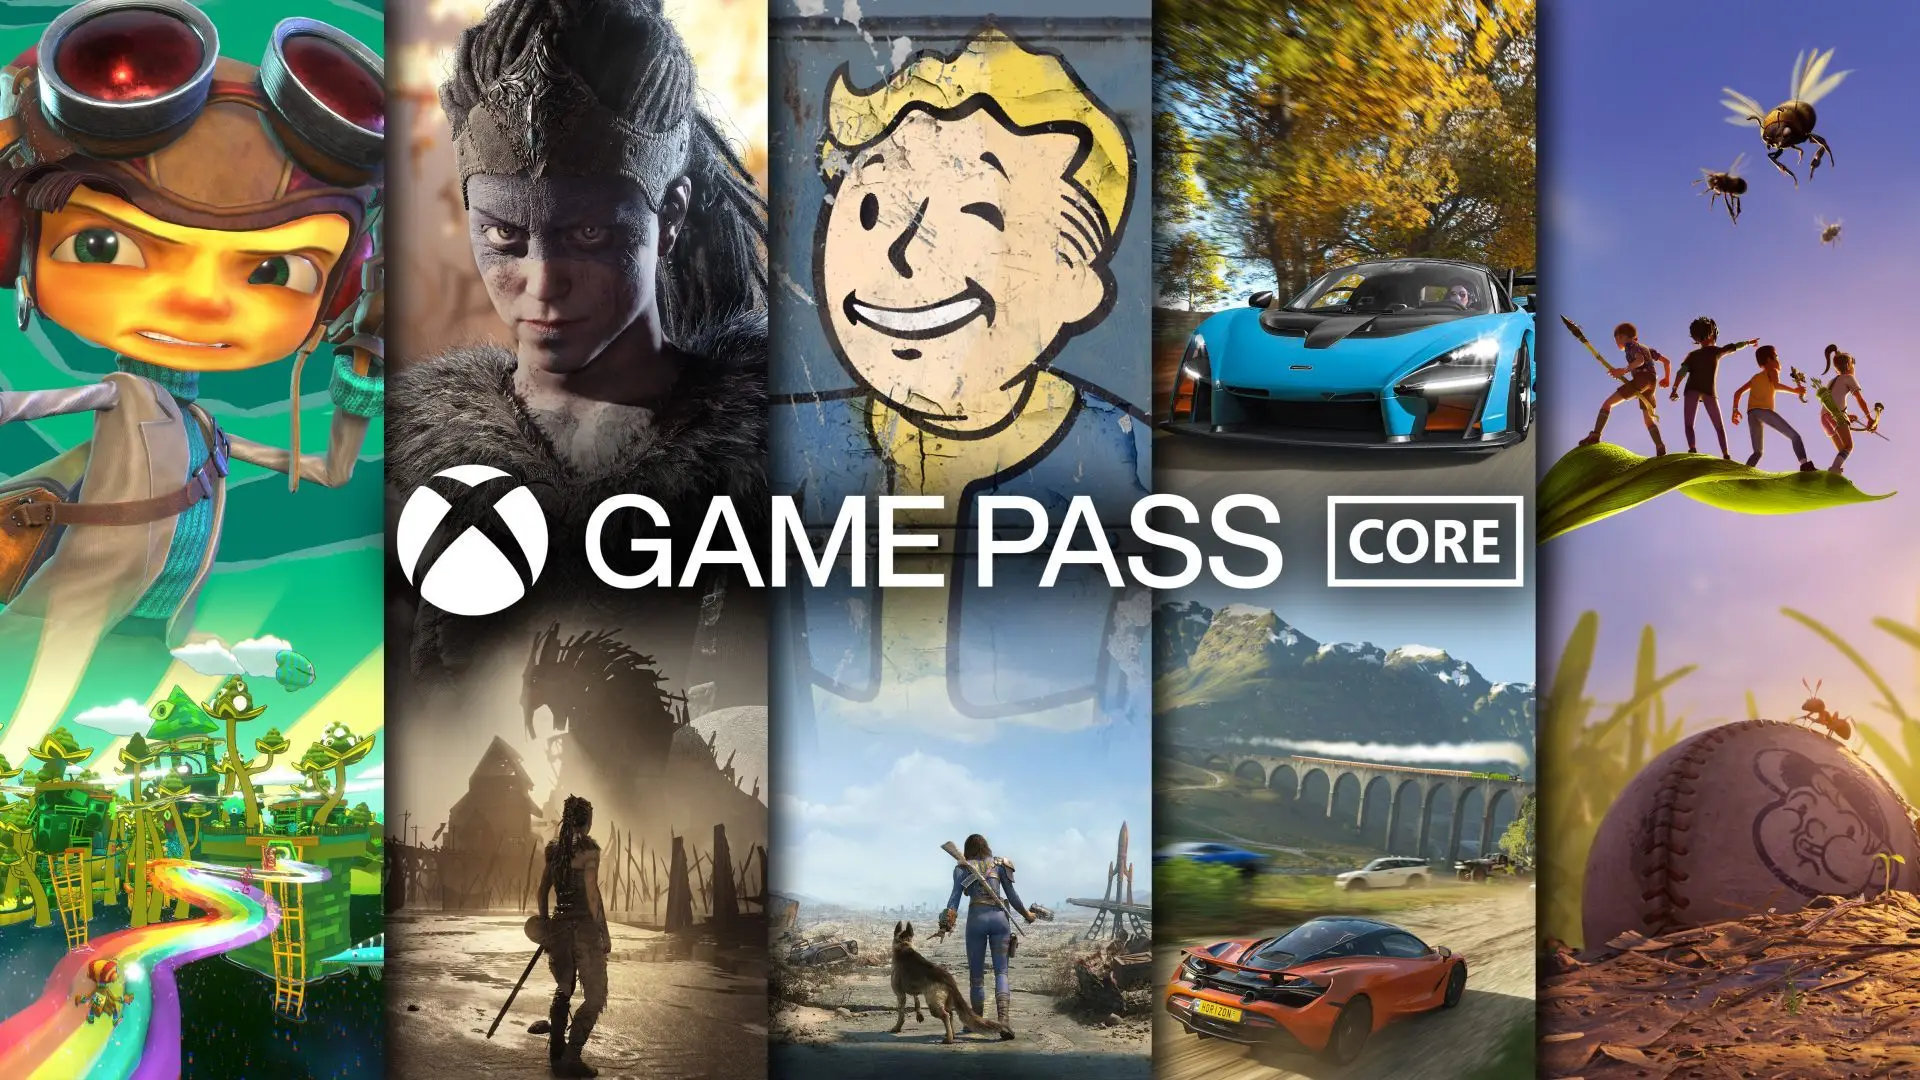 Xbox Game Pass Core: Replacing Xbox Live Gold with an Enhanced Gaming Experience